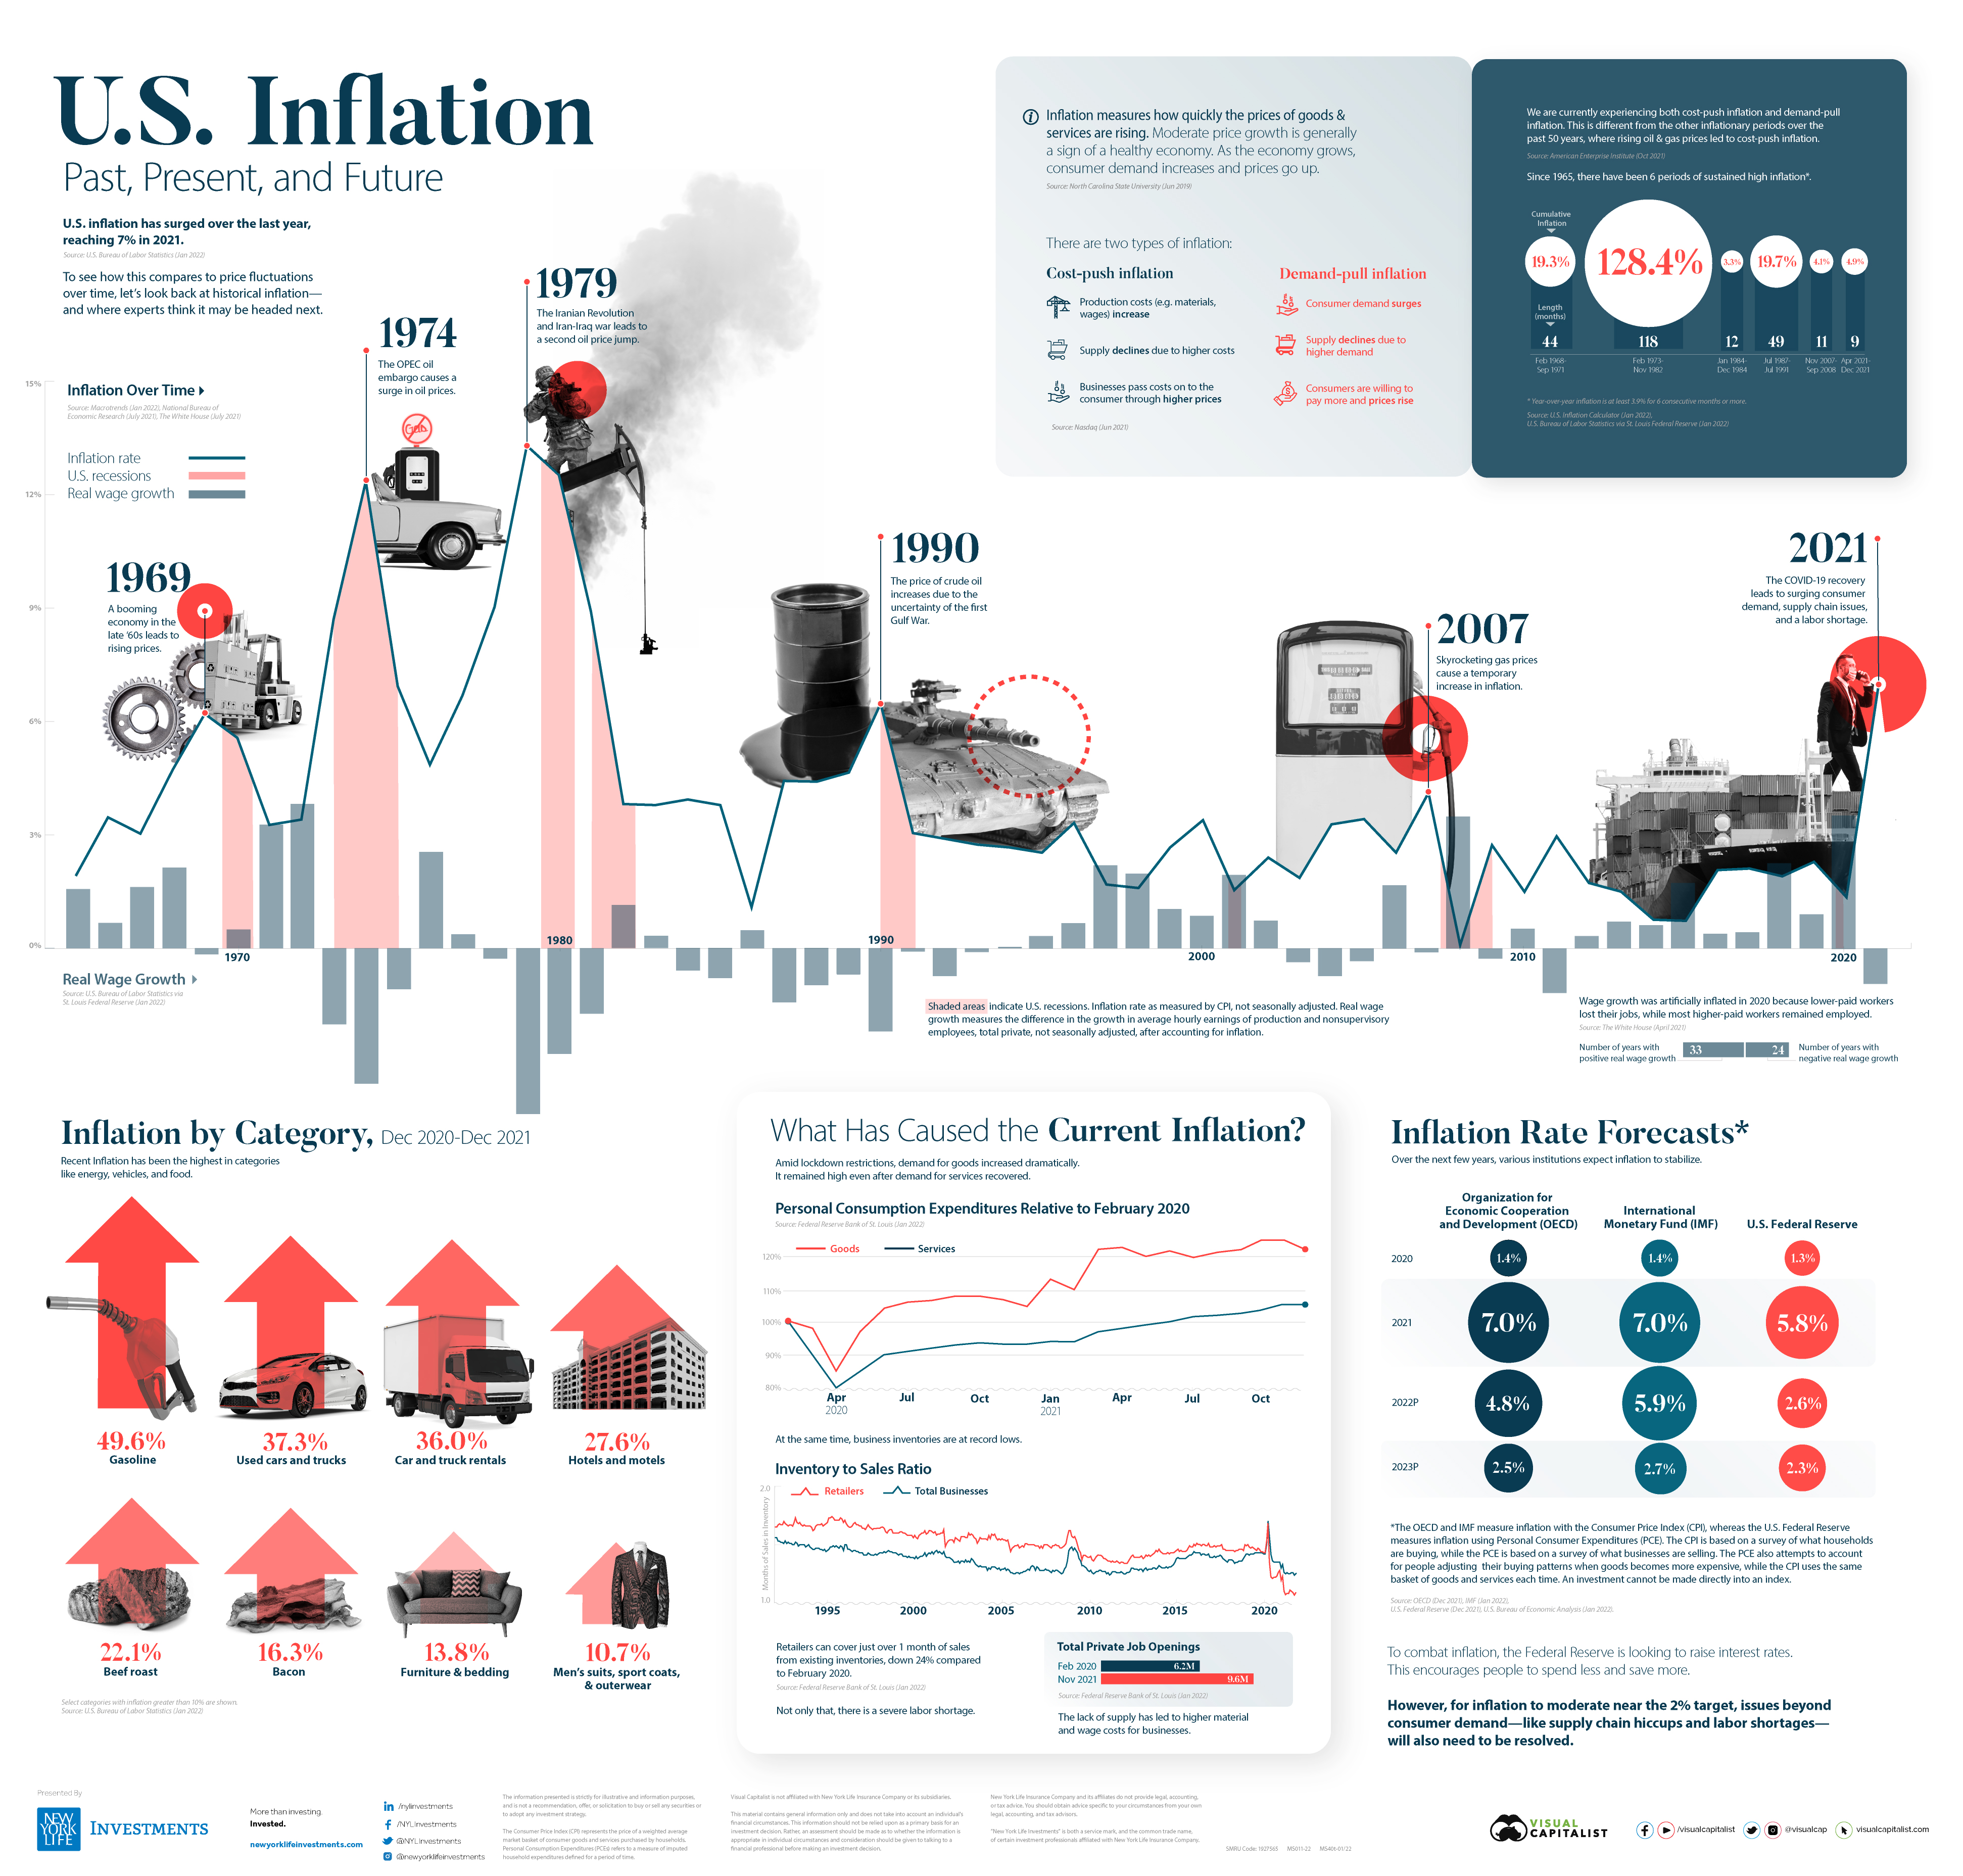 The Inflation Rate in the U.S.: Past, Present, and Future